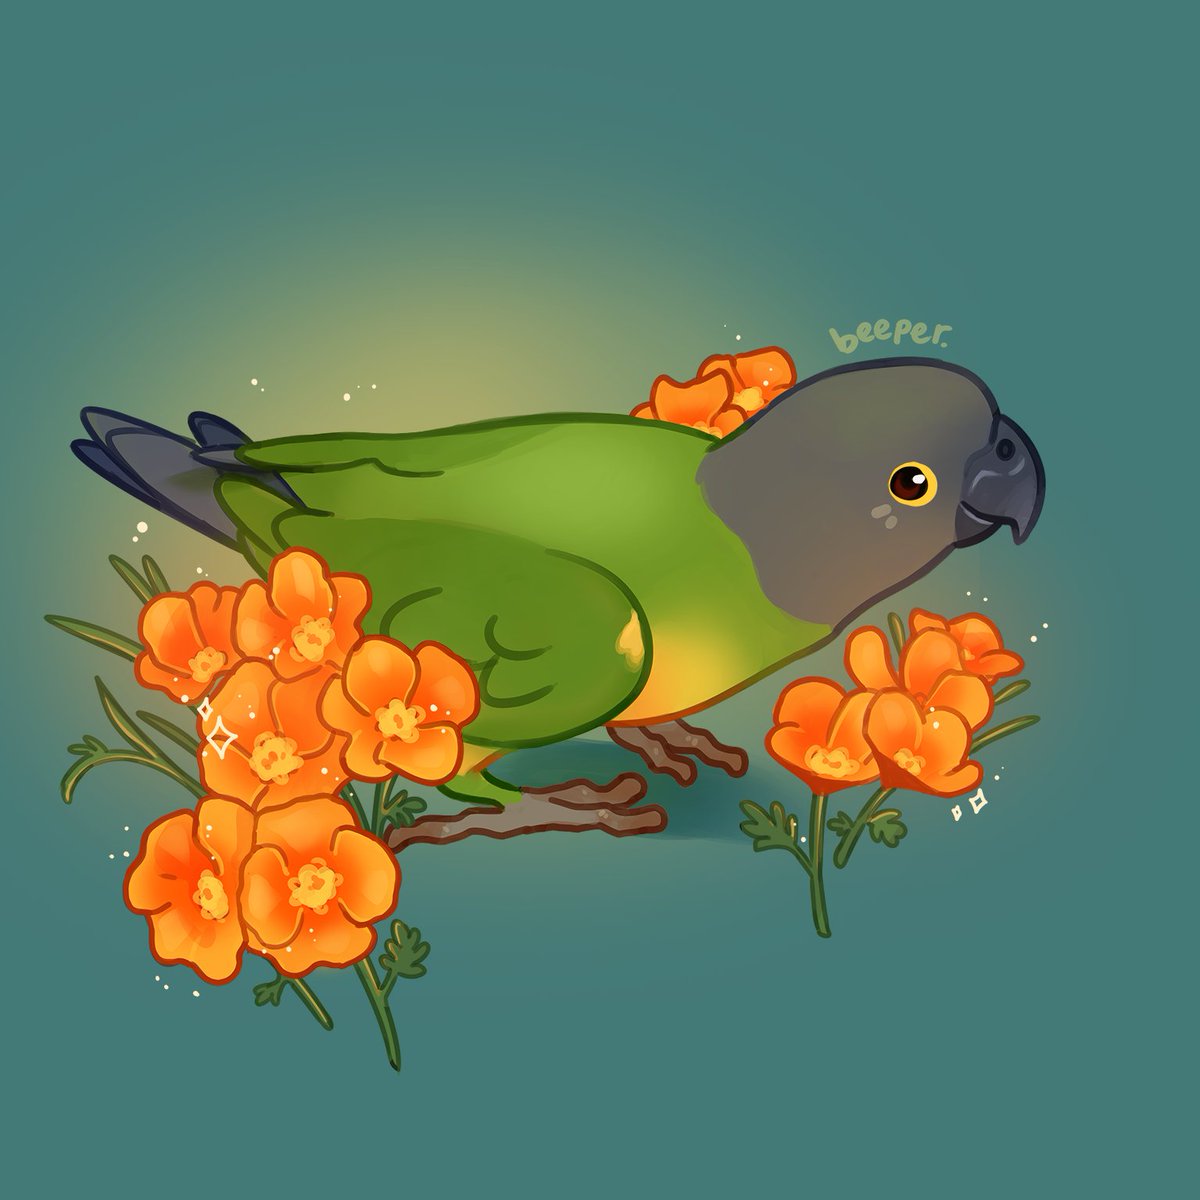 「cheeky senegal with orange poppies!! lat」|beeper.artのイラスト